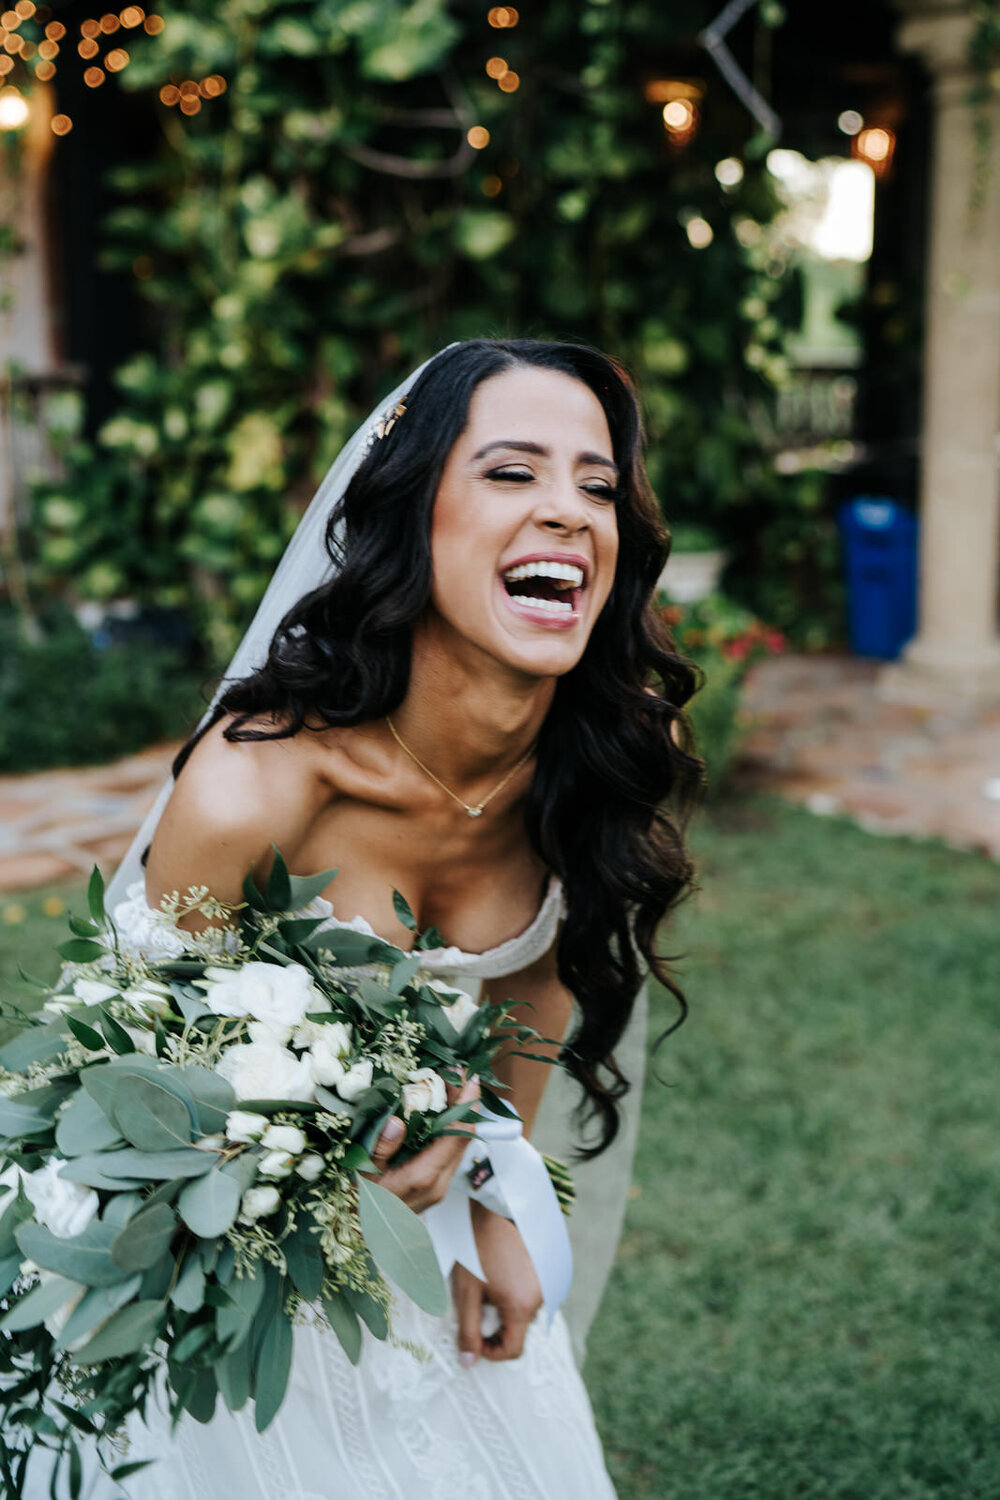 Slightly out of focus photograph of the bride smiling and laughi (Copy)